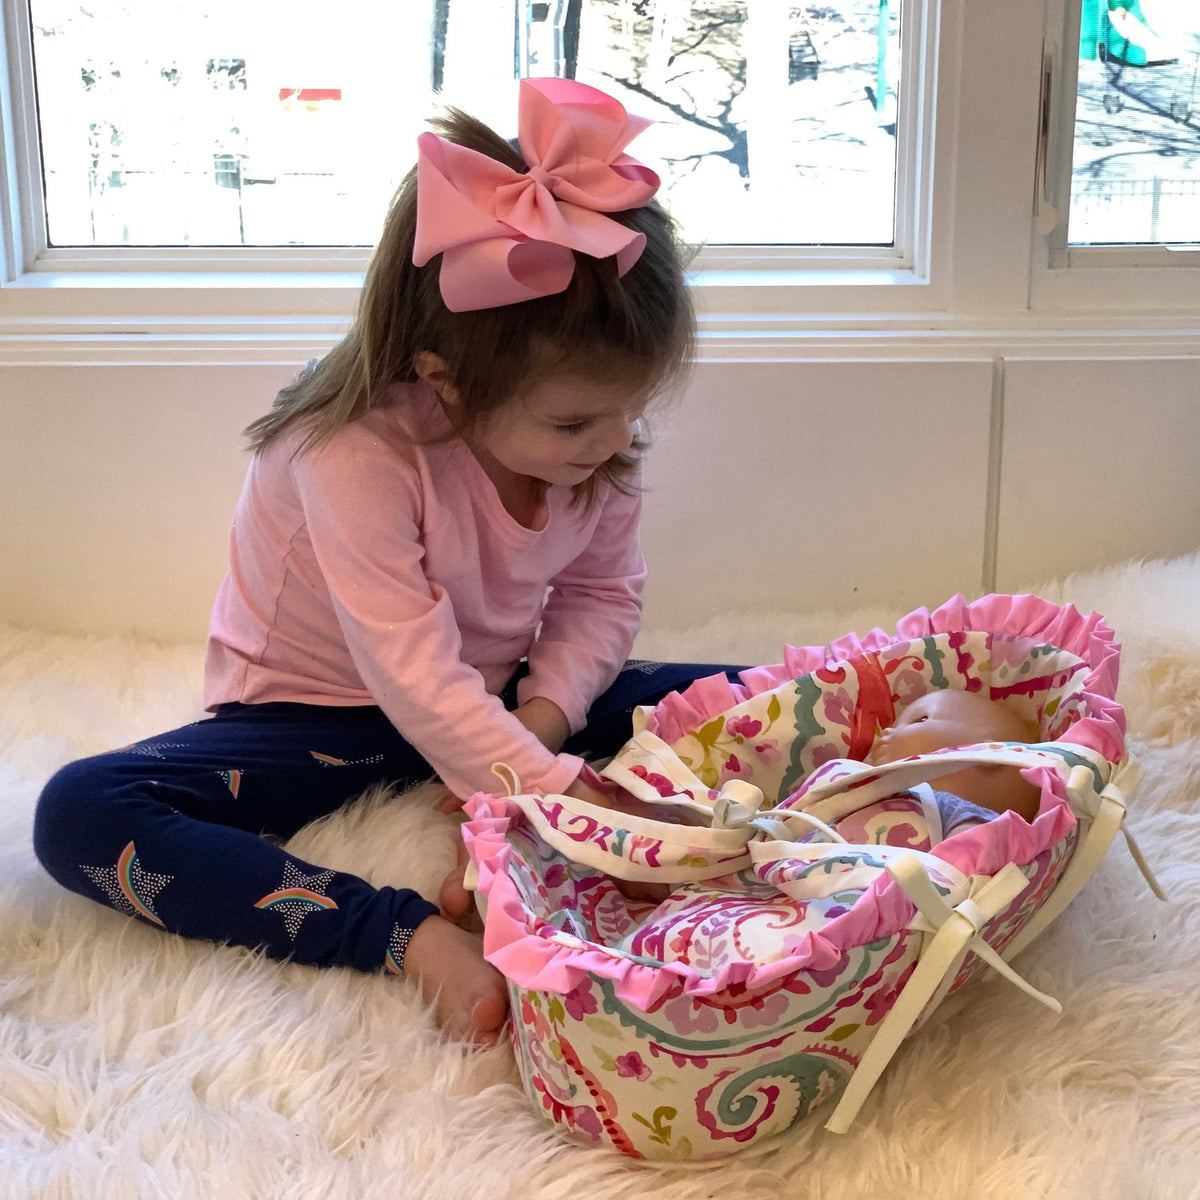 Personalized Doll Basket